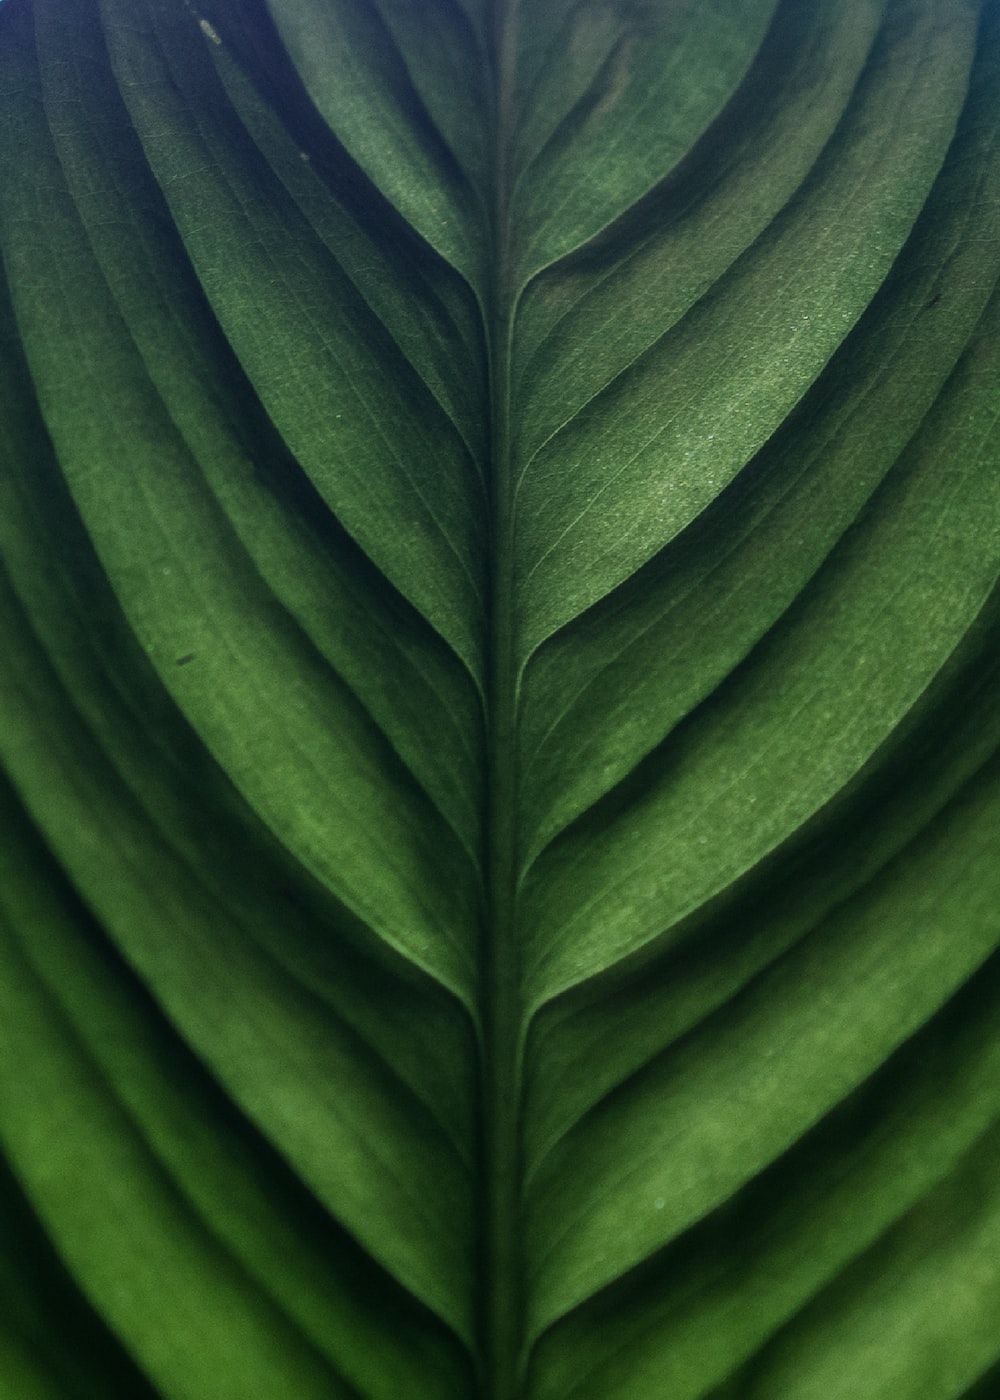 A close up of a green leaf - Leaves